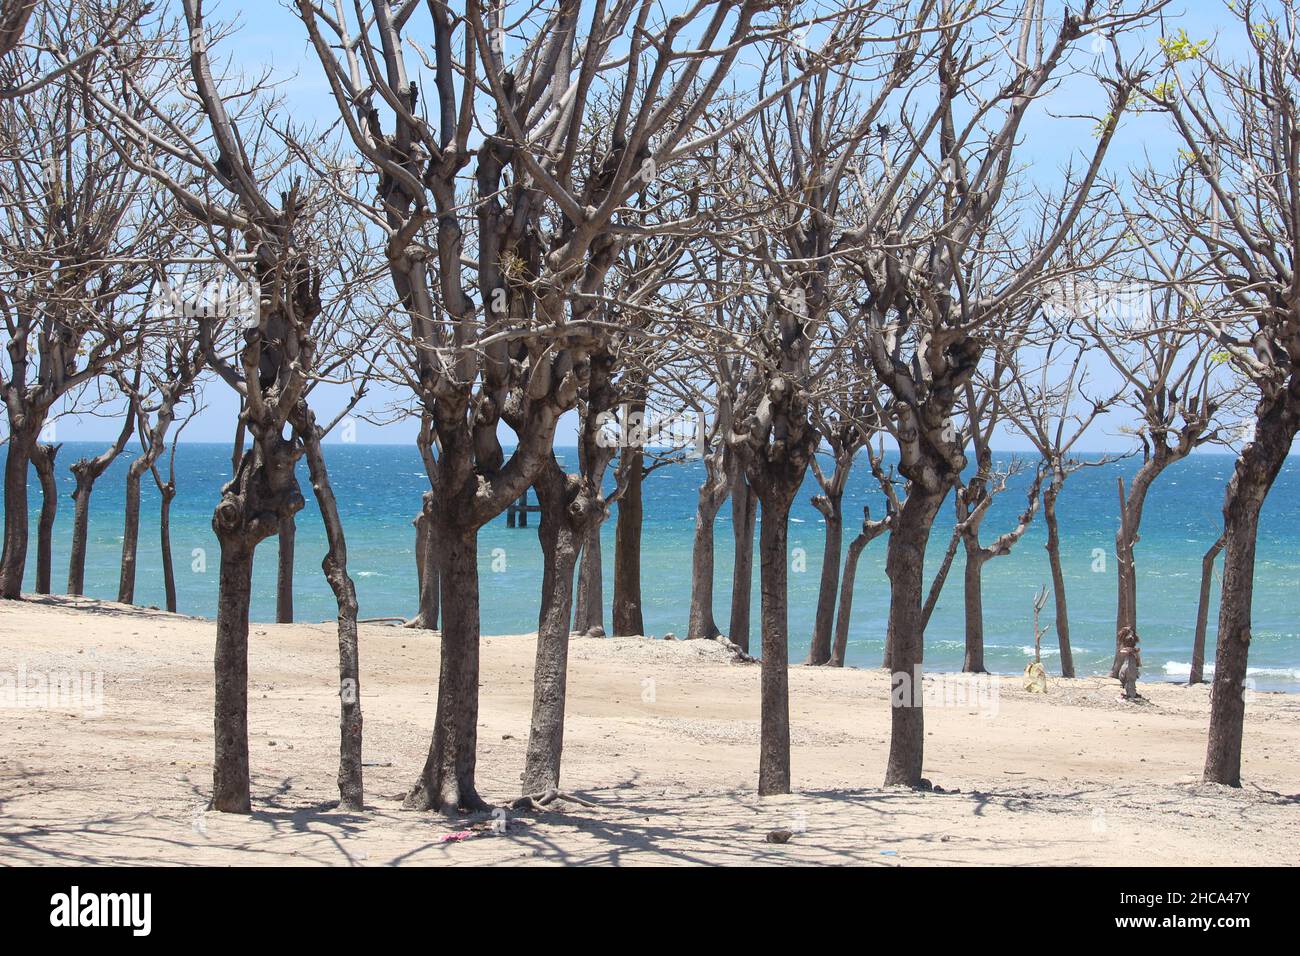 the arid mangrove forest close to the blue beach with the beauty of the ocean as well Stock Photo